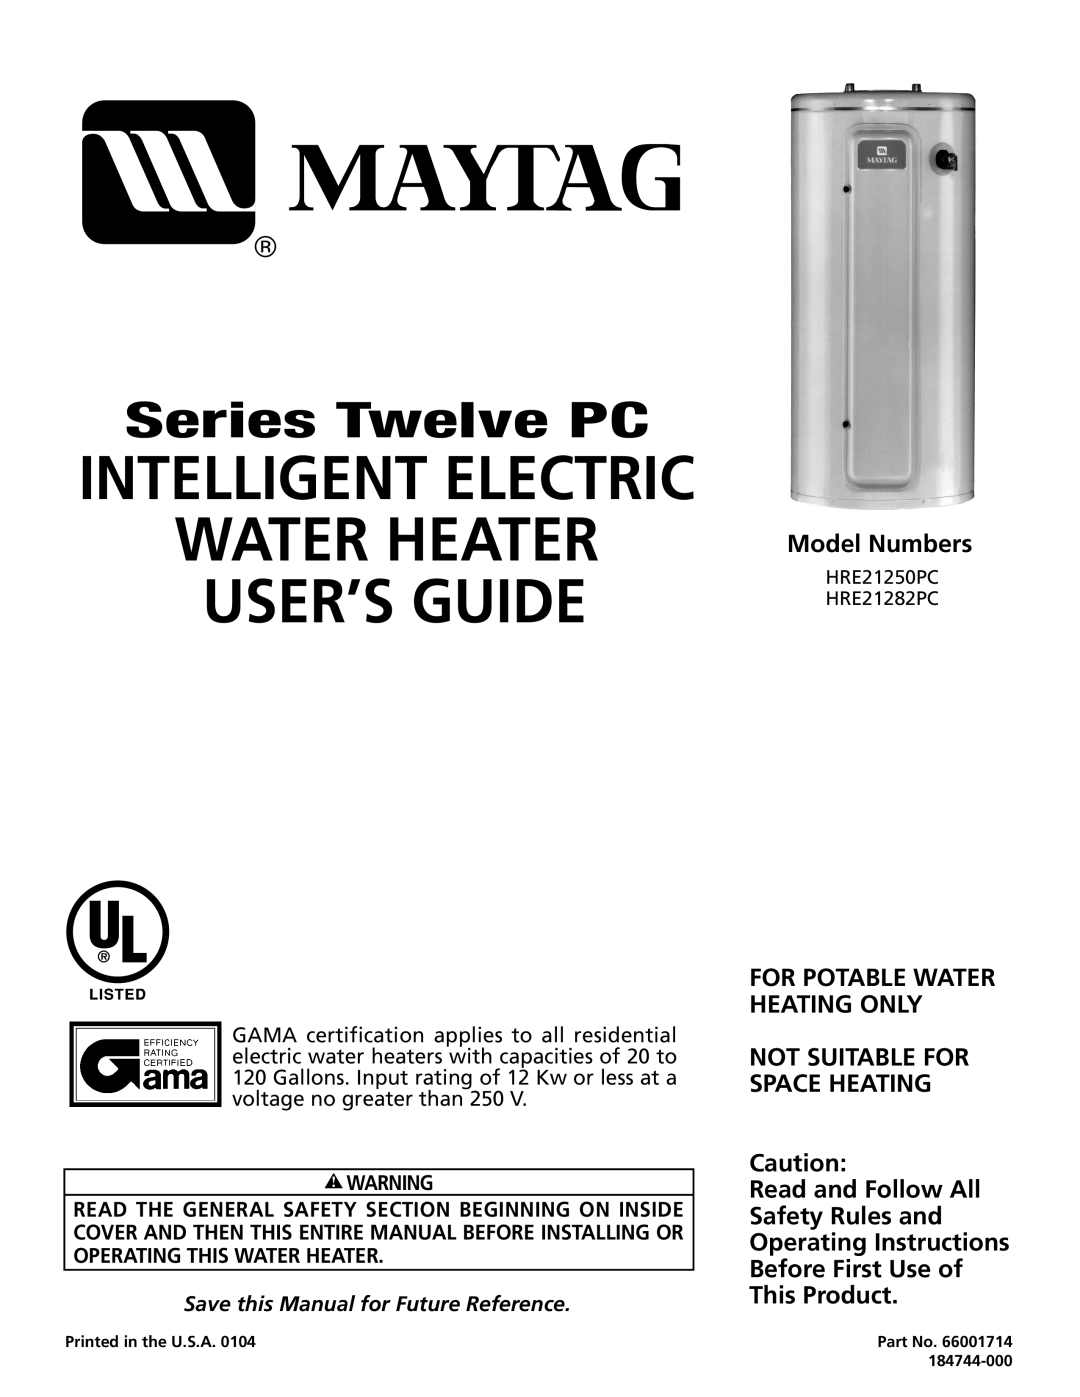 Maytag HRE21282PC manual Water Heater User’S Guide, Intelligent Electric, Series Twelve PC, Model Numbers, This Product 